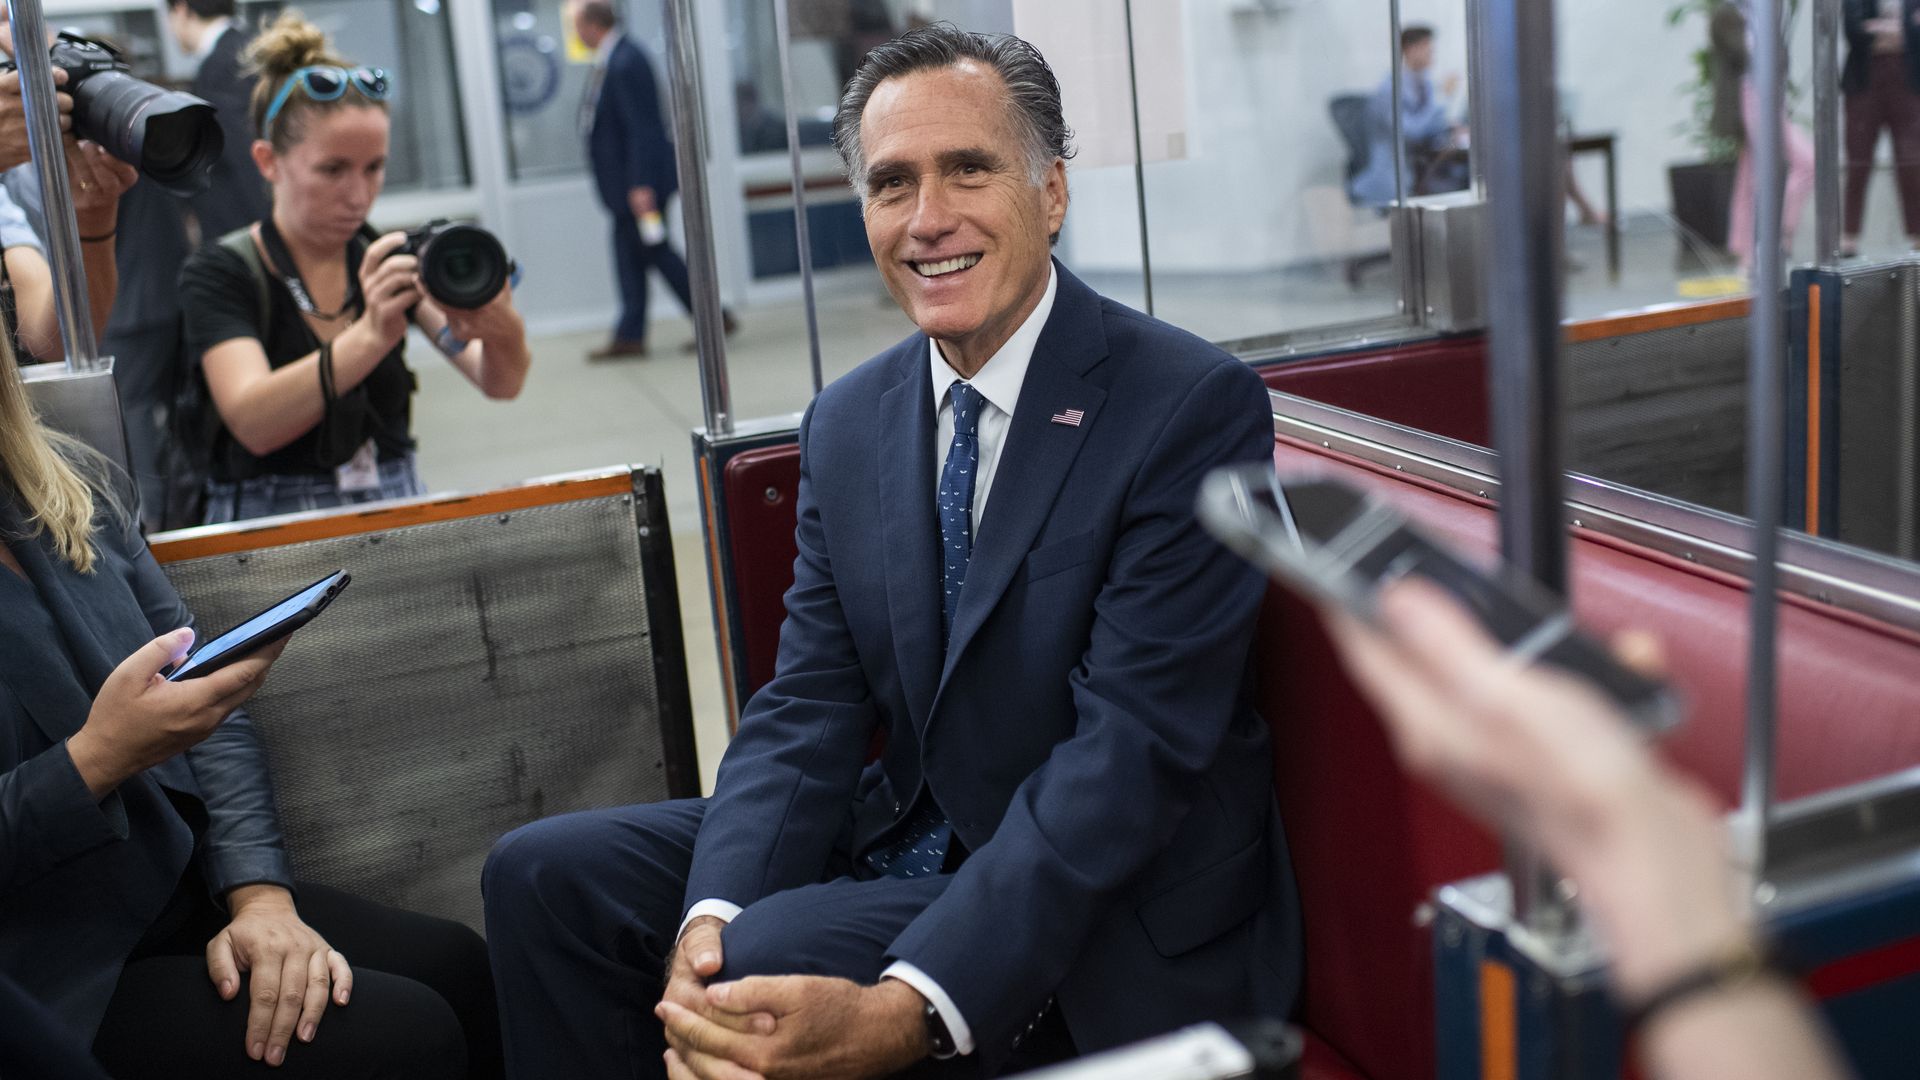 Sen. Mitt Romney is seen smiling as he sits in a Senate subway car as he discusses infrastructure negotiations.